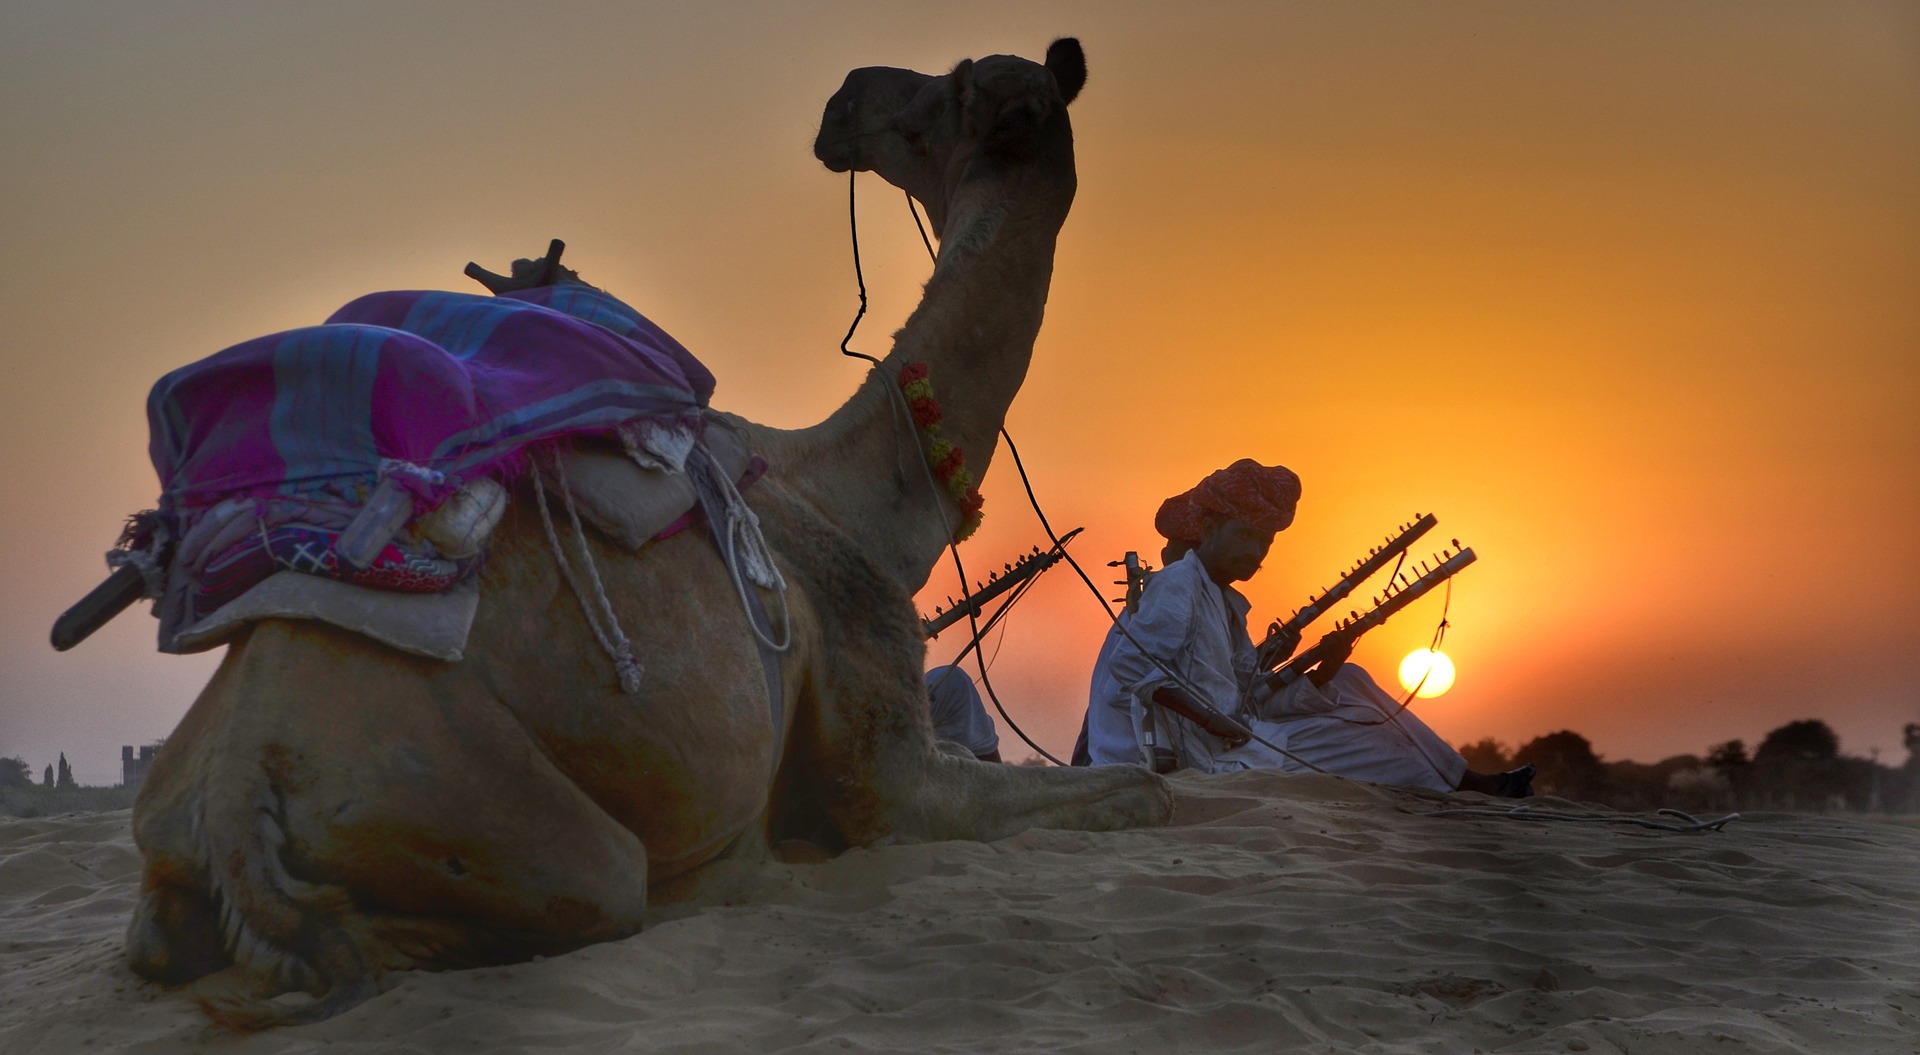 Desert of Rajasthan with camel at sunset.